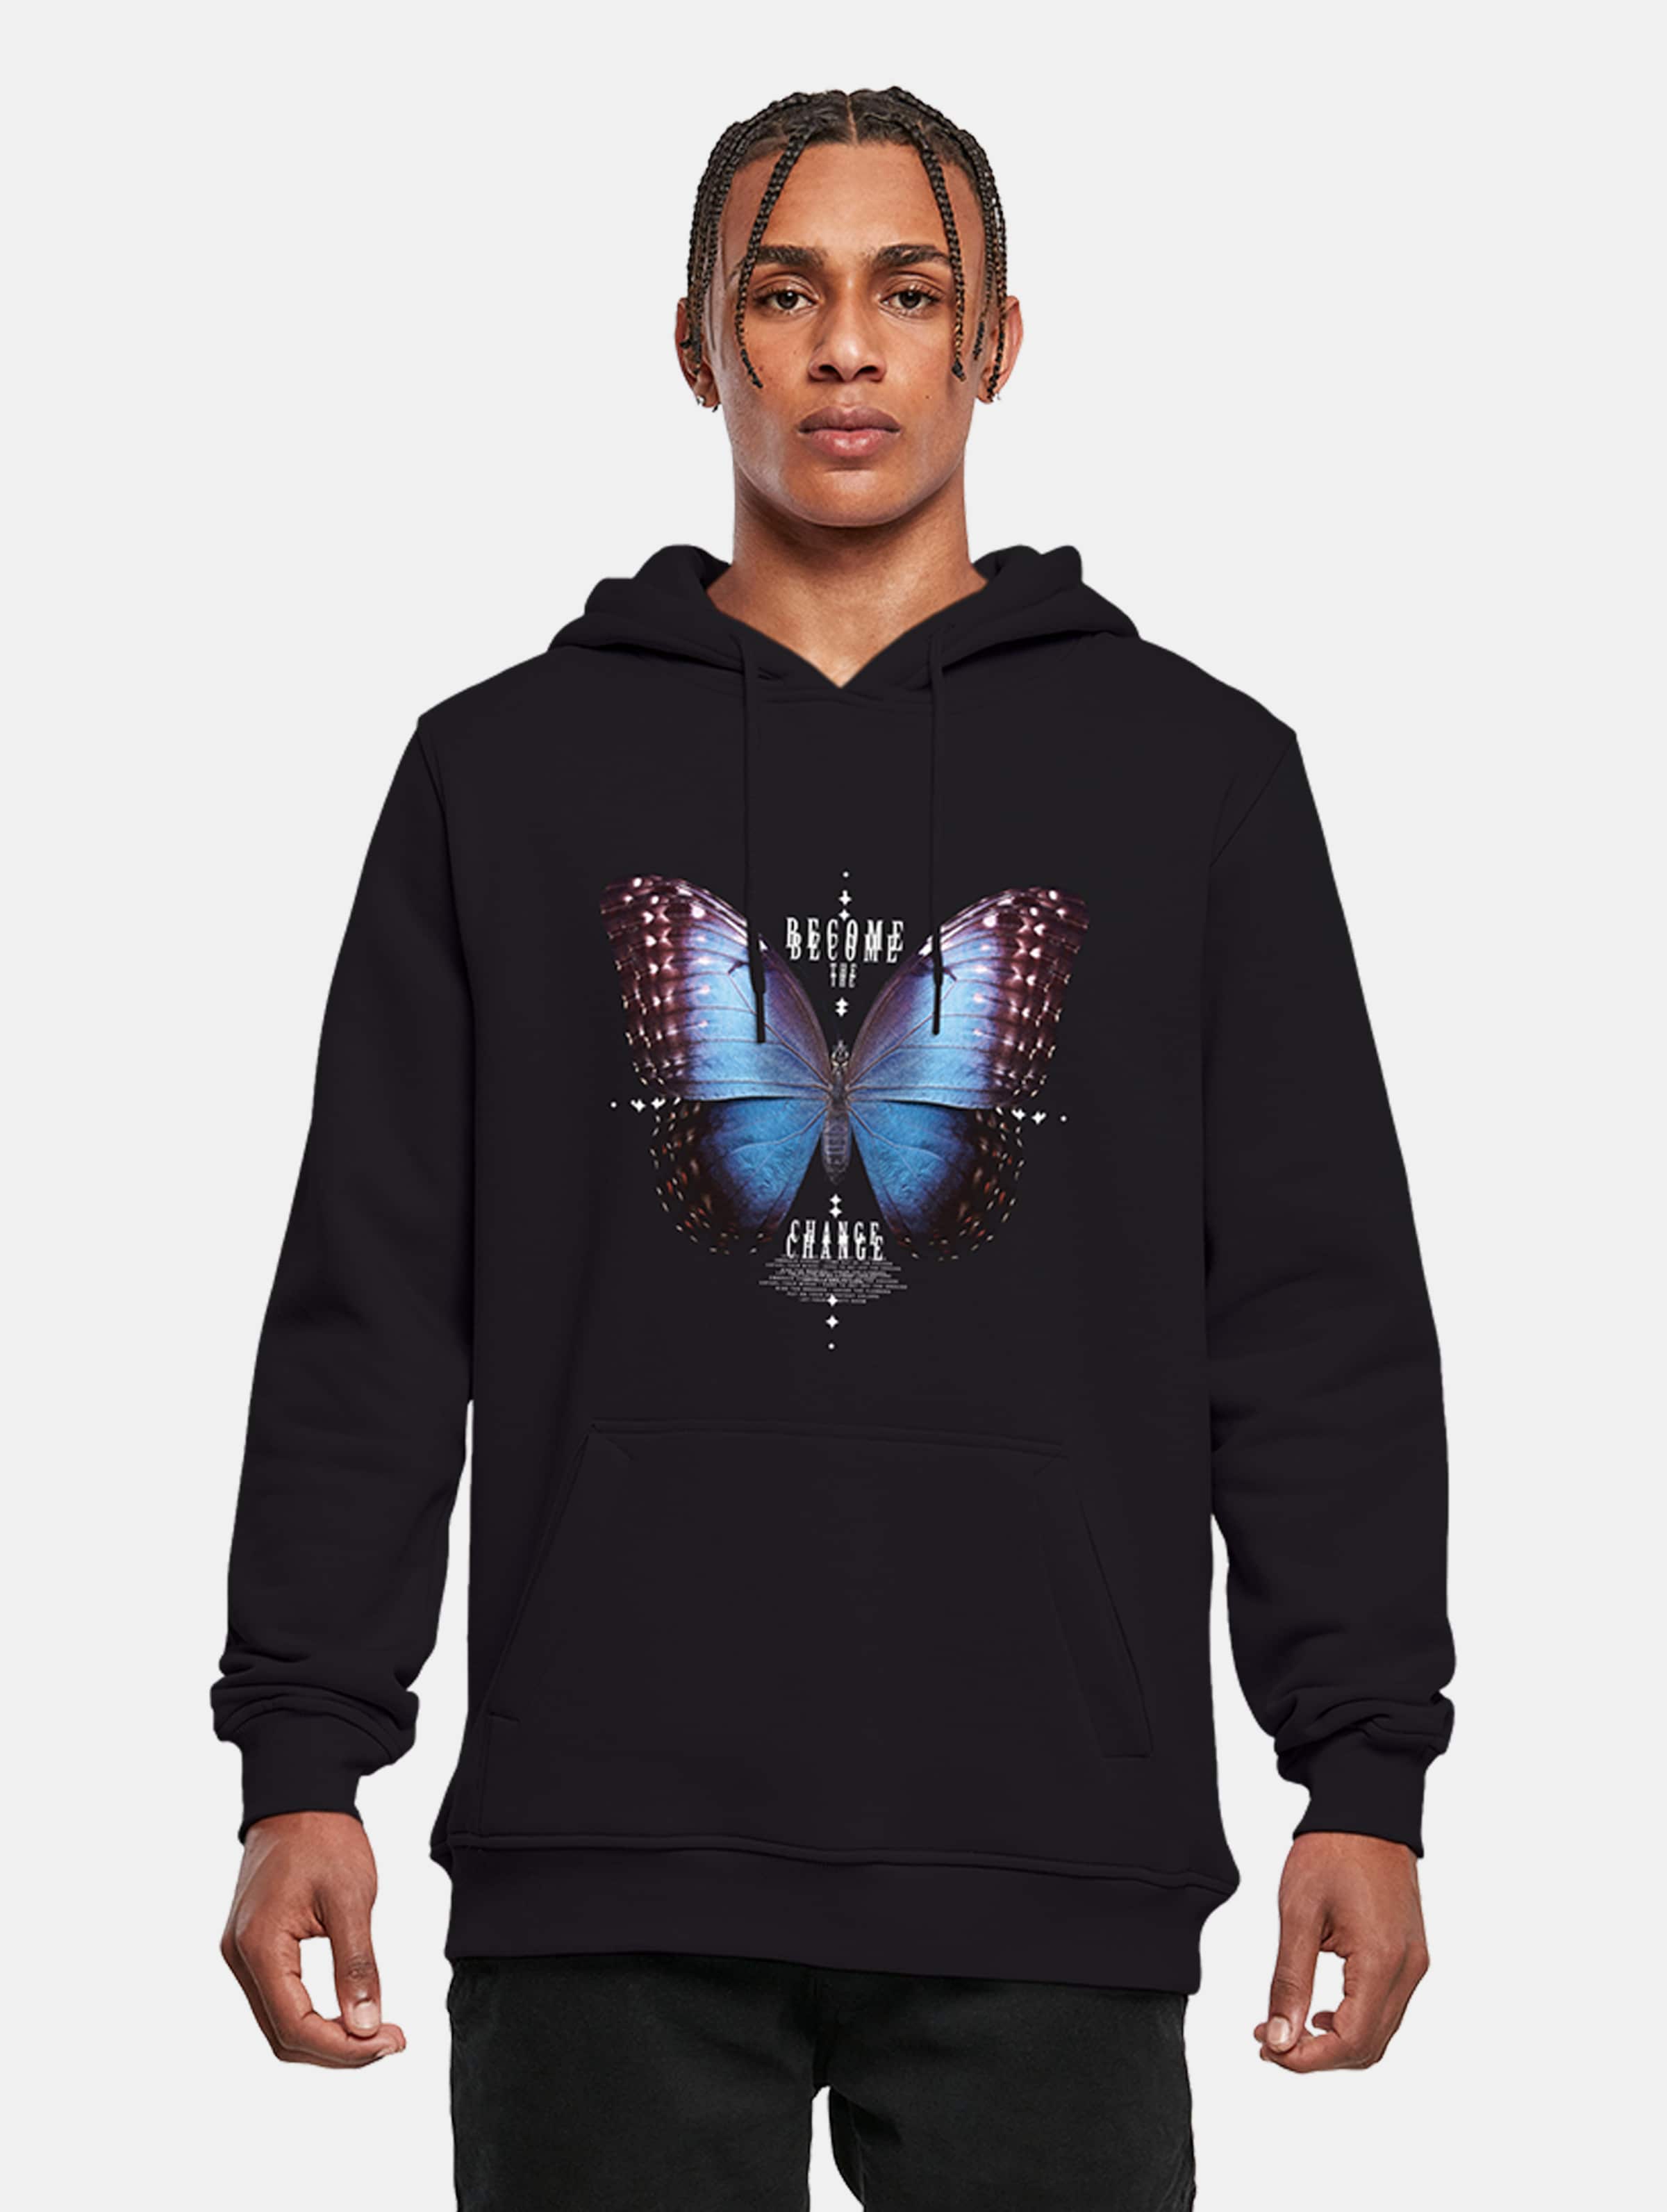 Mister Tee - Become The Change Butterfly Hoodie/trui - 3XL - Zwart